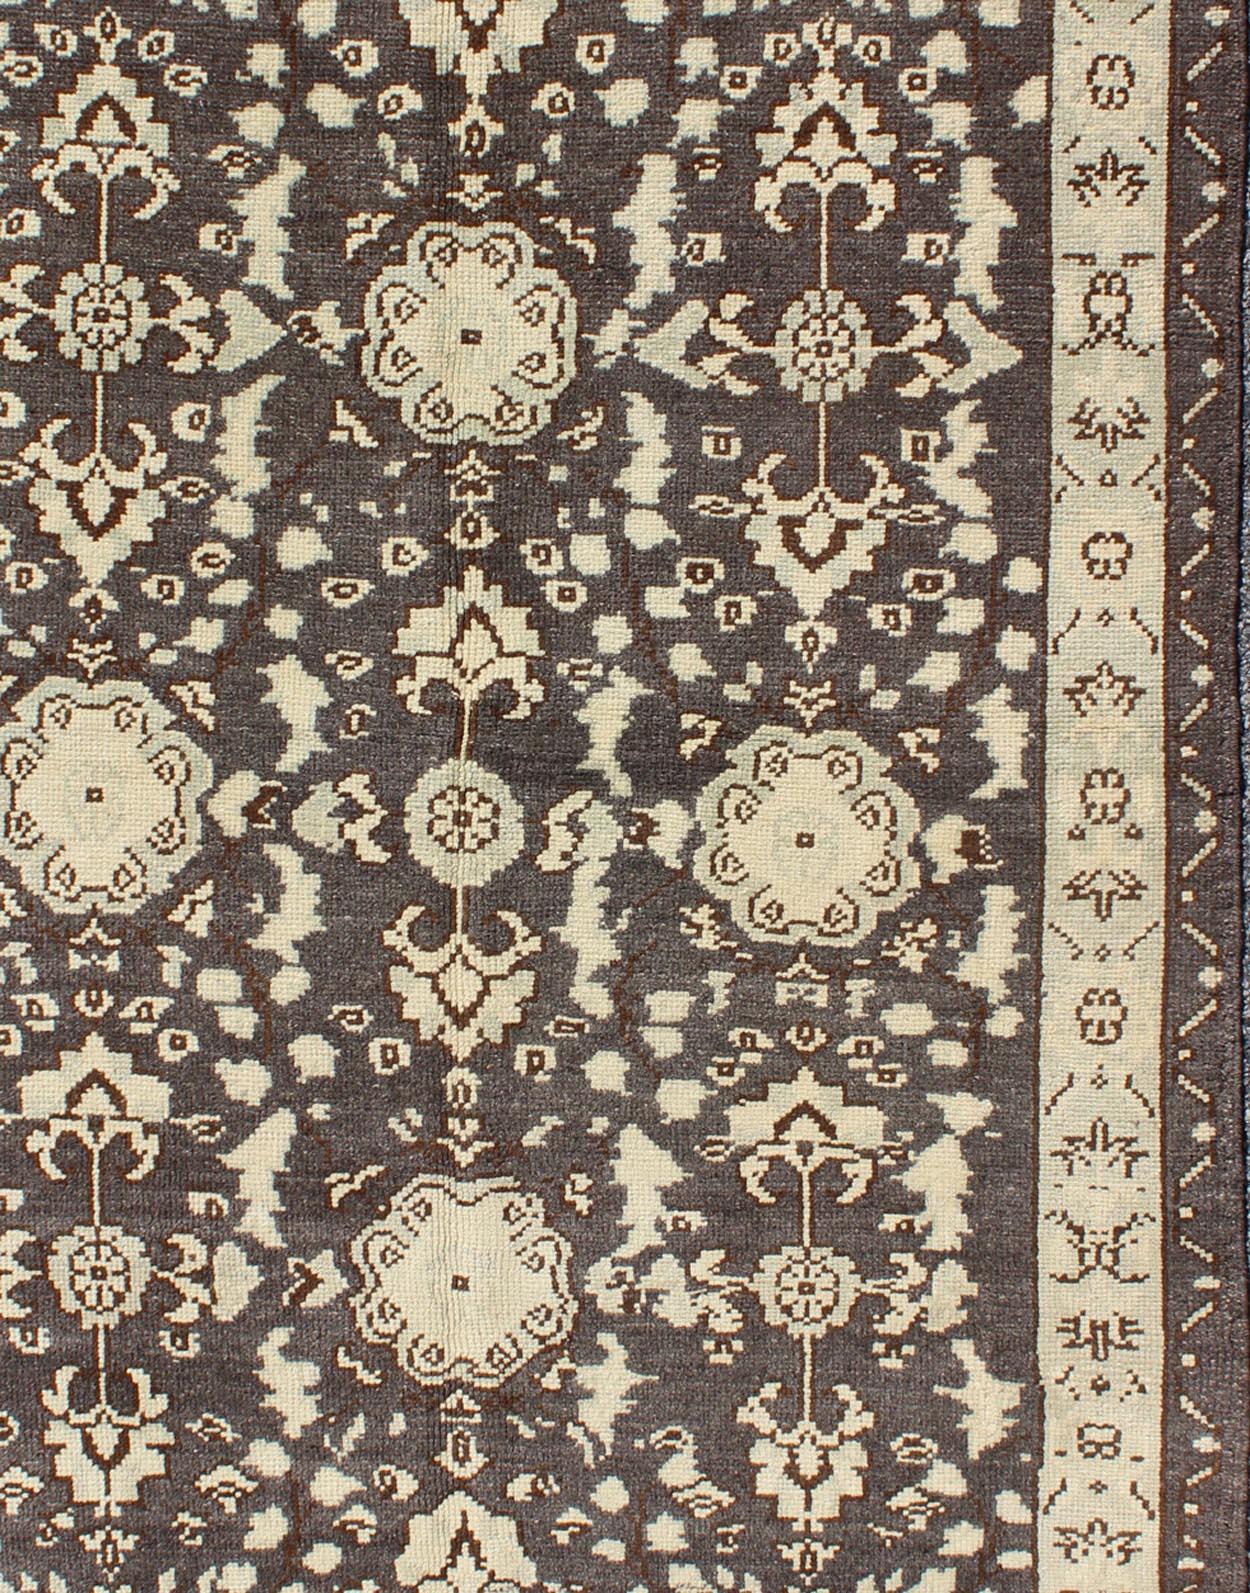 Measures: 3'9 x 5'10.

This vintage Oushak was hand-knotted in Turkey during the 1940's. The charcoal/gray background dark brown highlights field displays clover motifs and other nature designs in antique white with accents in a soft, pale jade.